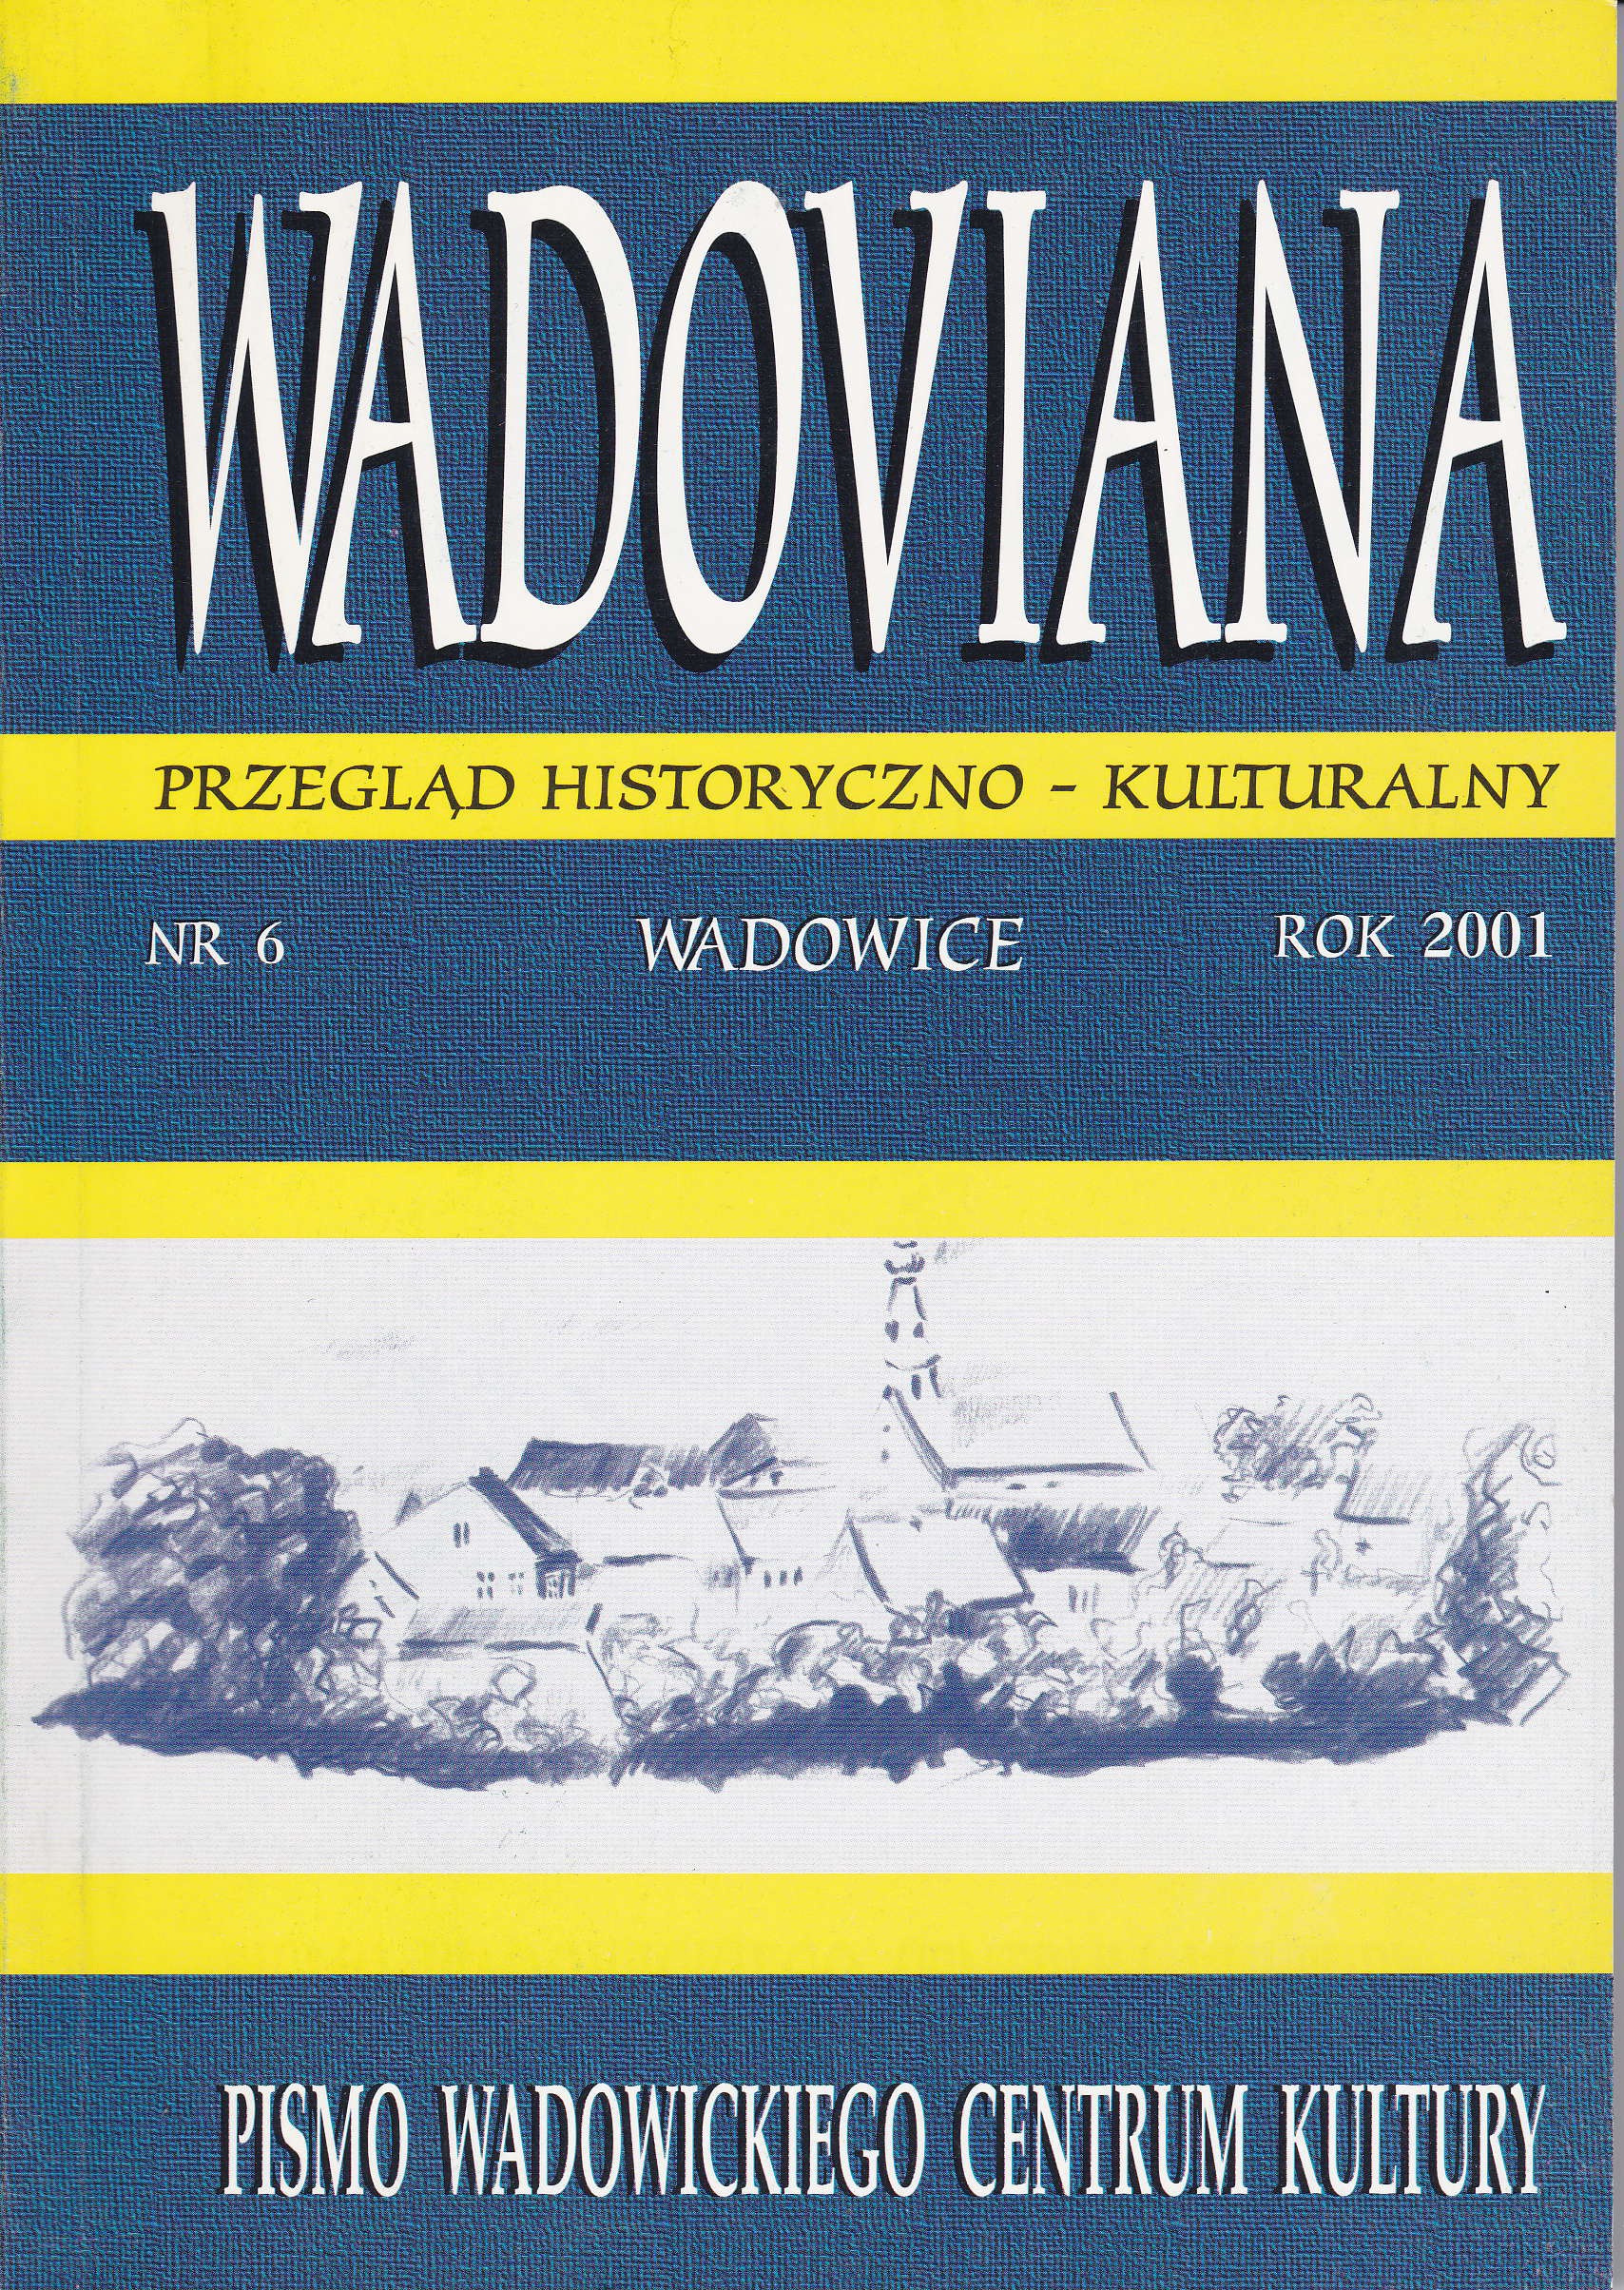 Before rehearsal time. 12th Infantry Regiment of the Wadowice Region and the Wadowice garrison before World War II. Outline of the problem. Cover Image